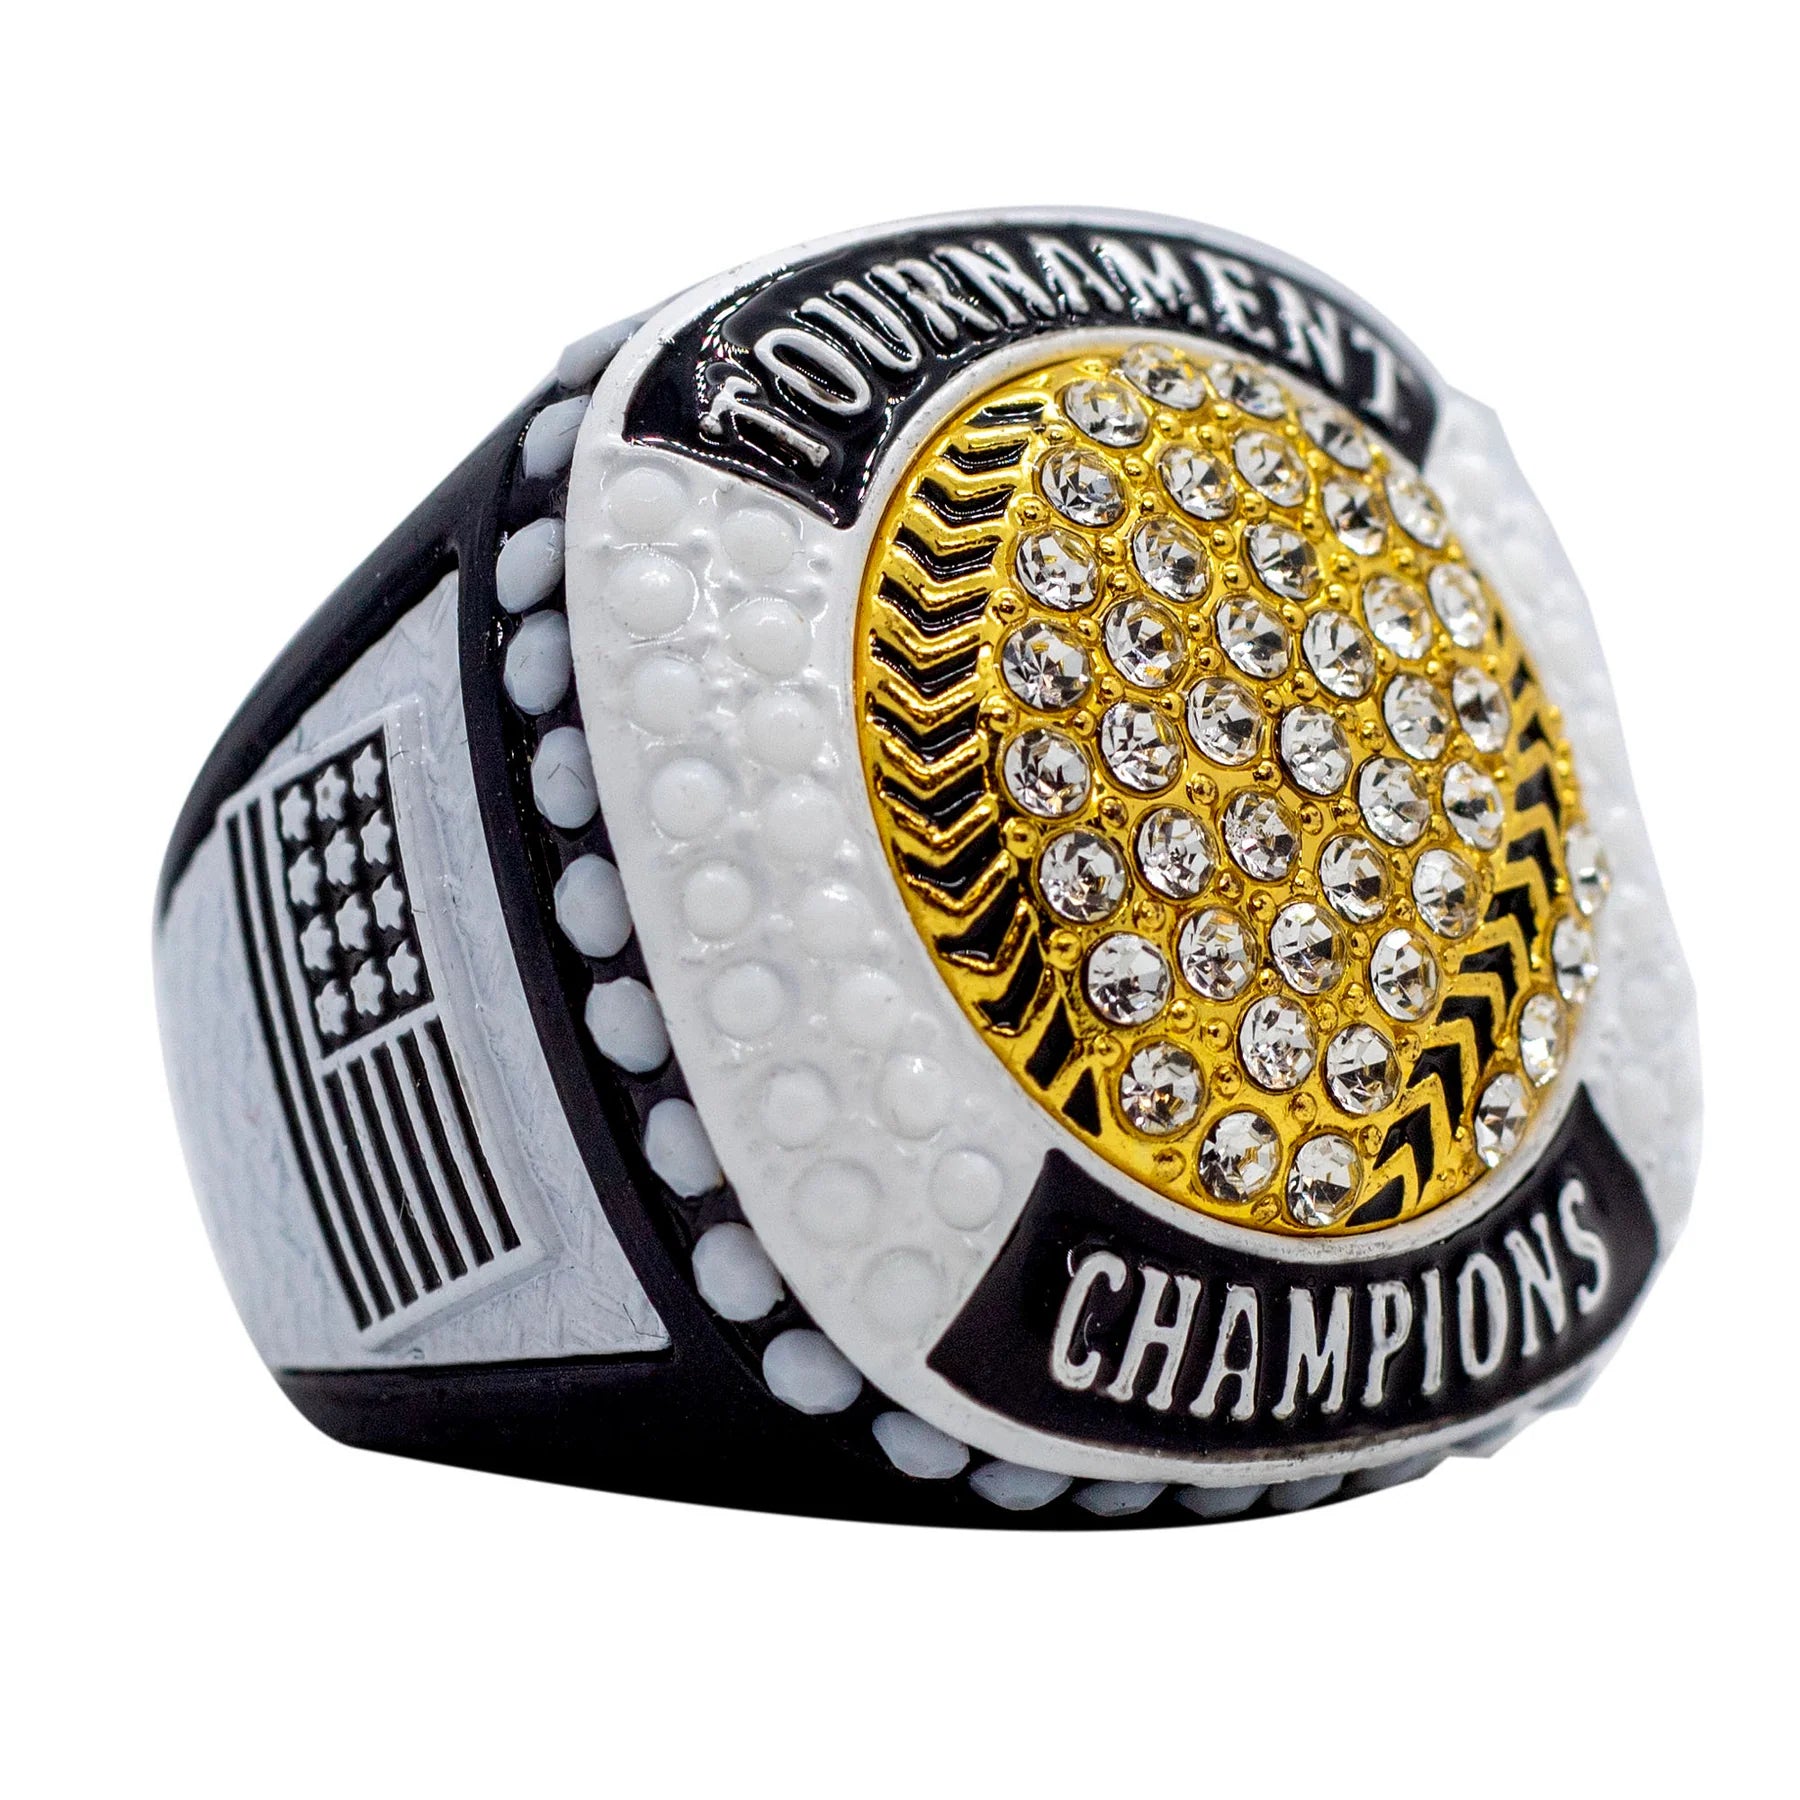 ALL GOLD TOURNAMENT CHAMPIONS RING